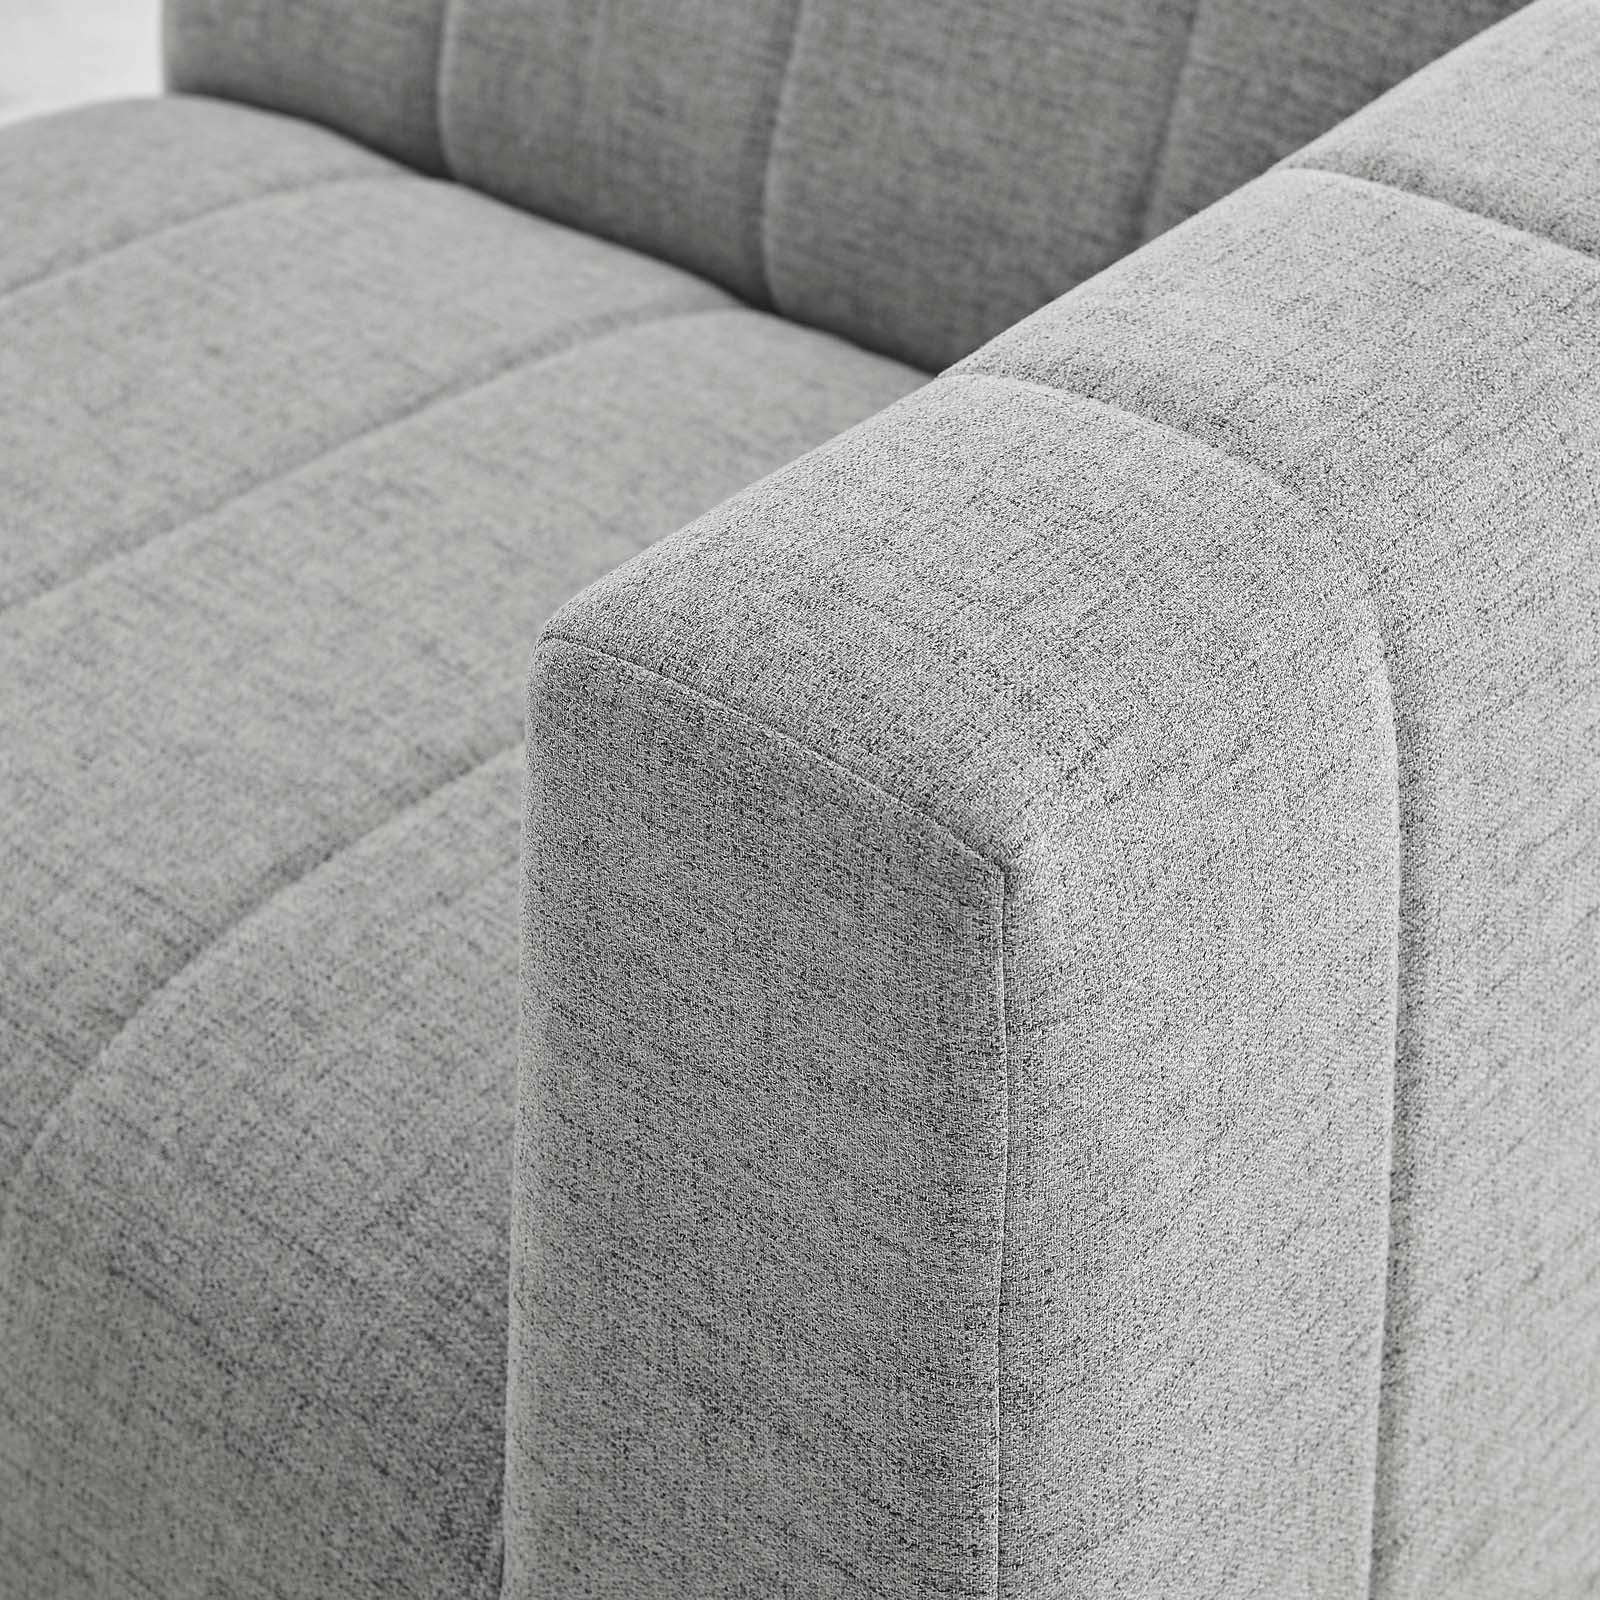 Modway Sofas & Couches - Bartlett Upholstered Fabric 3-Piece Sofa Light Gray